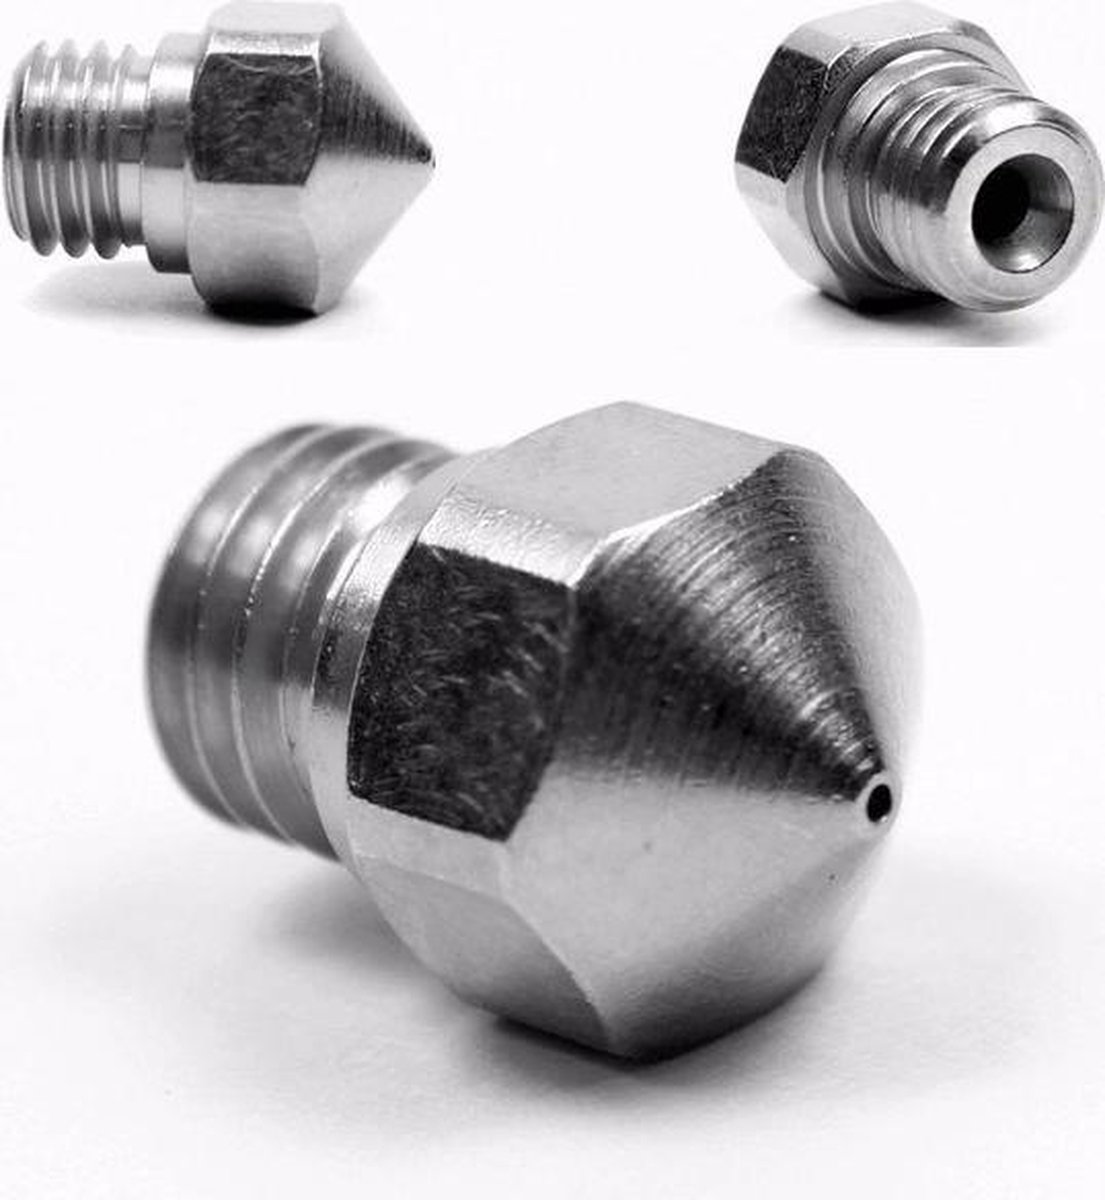 Micro Swiss - 0.6 mm - nozzle for MK10 All Metal Hotend ONLY A2 - Hardened Steel